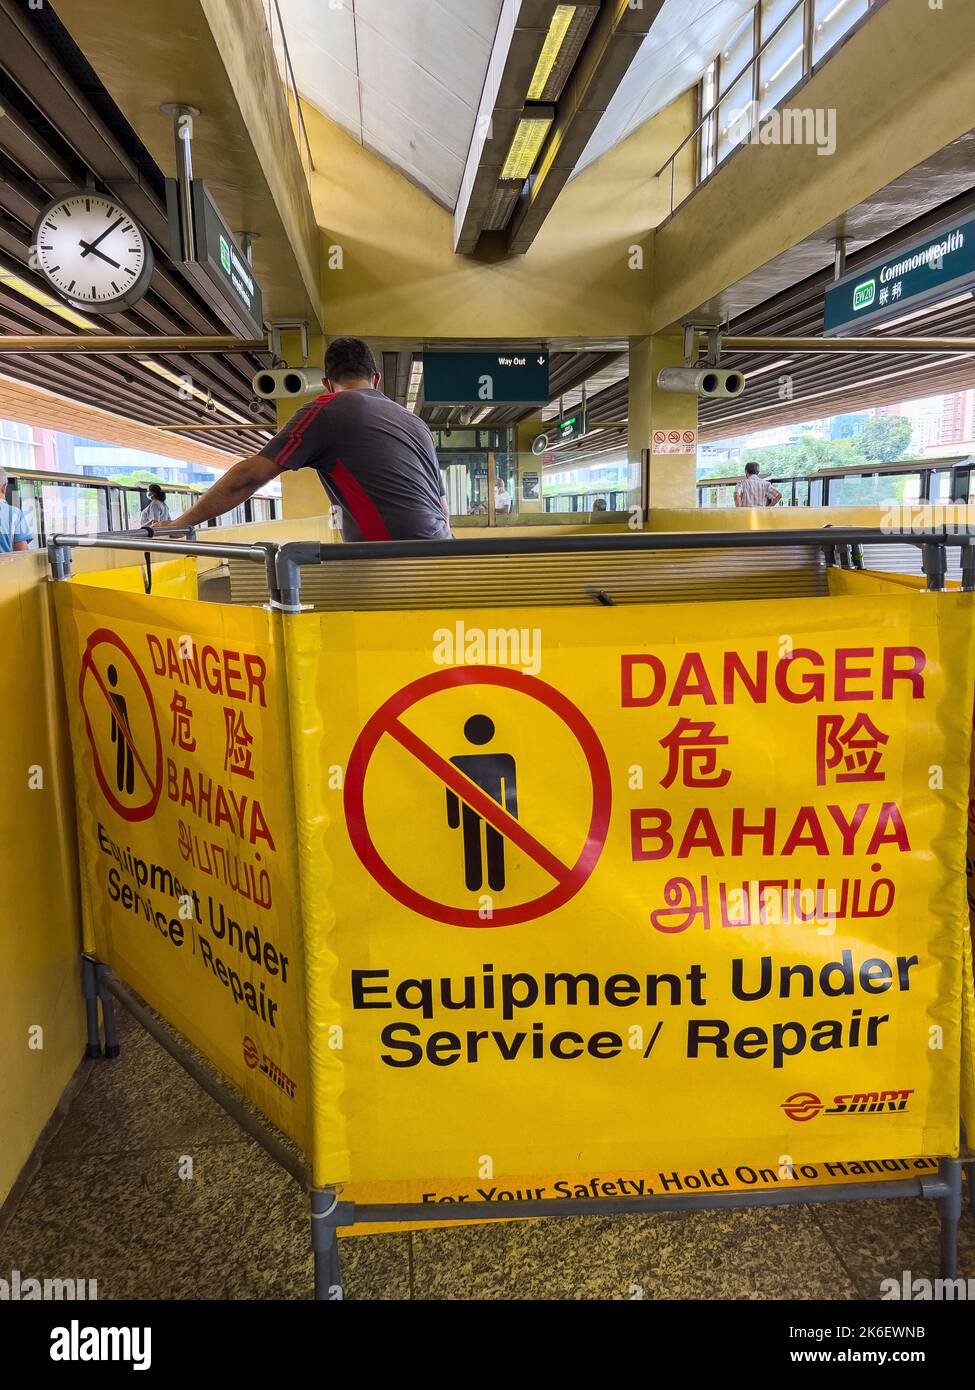 Escalator is closed for repair at train station, danger sign is put up to inform the public. A professional service staff is doing the work. Stock Photo